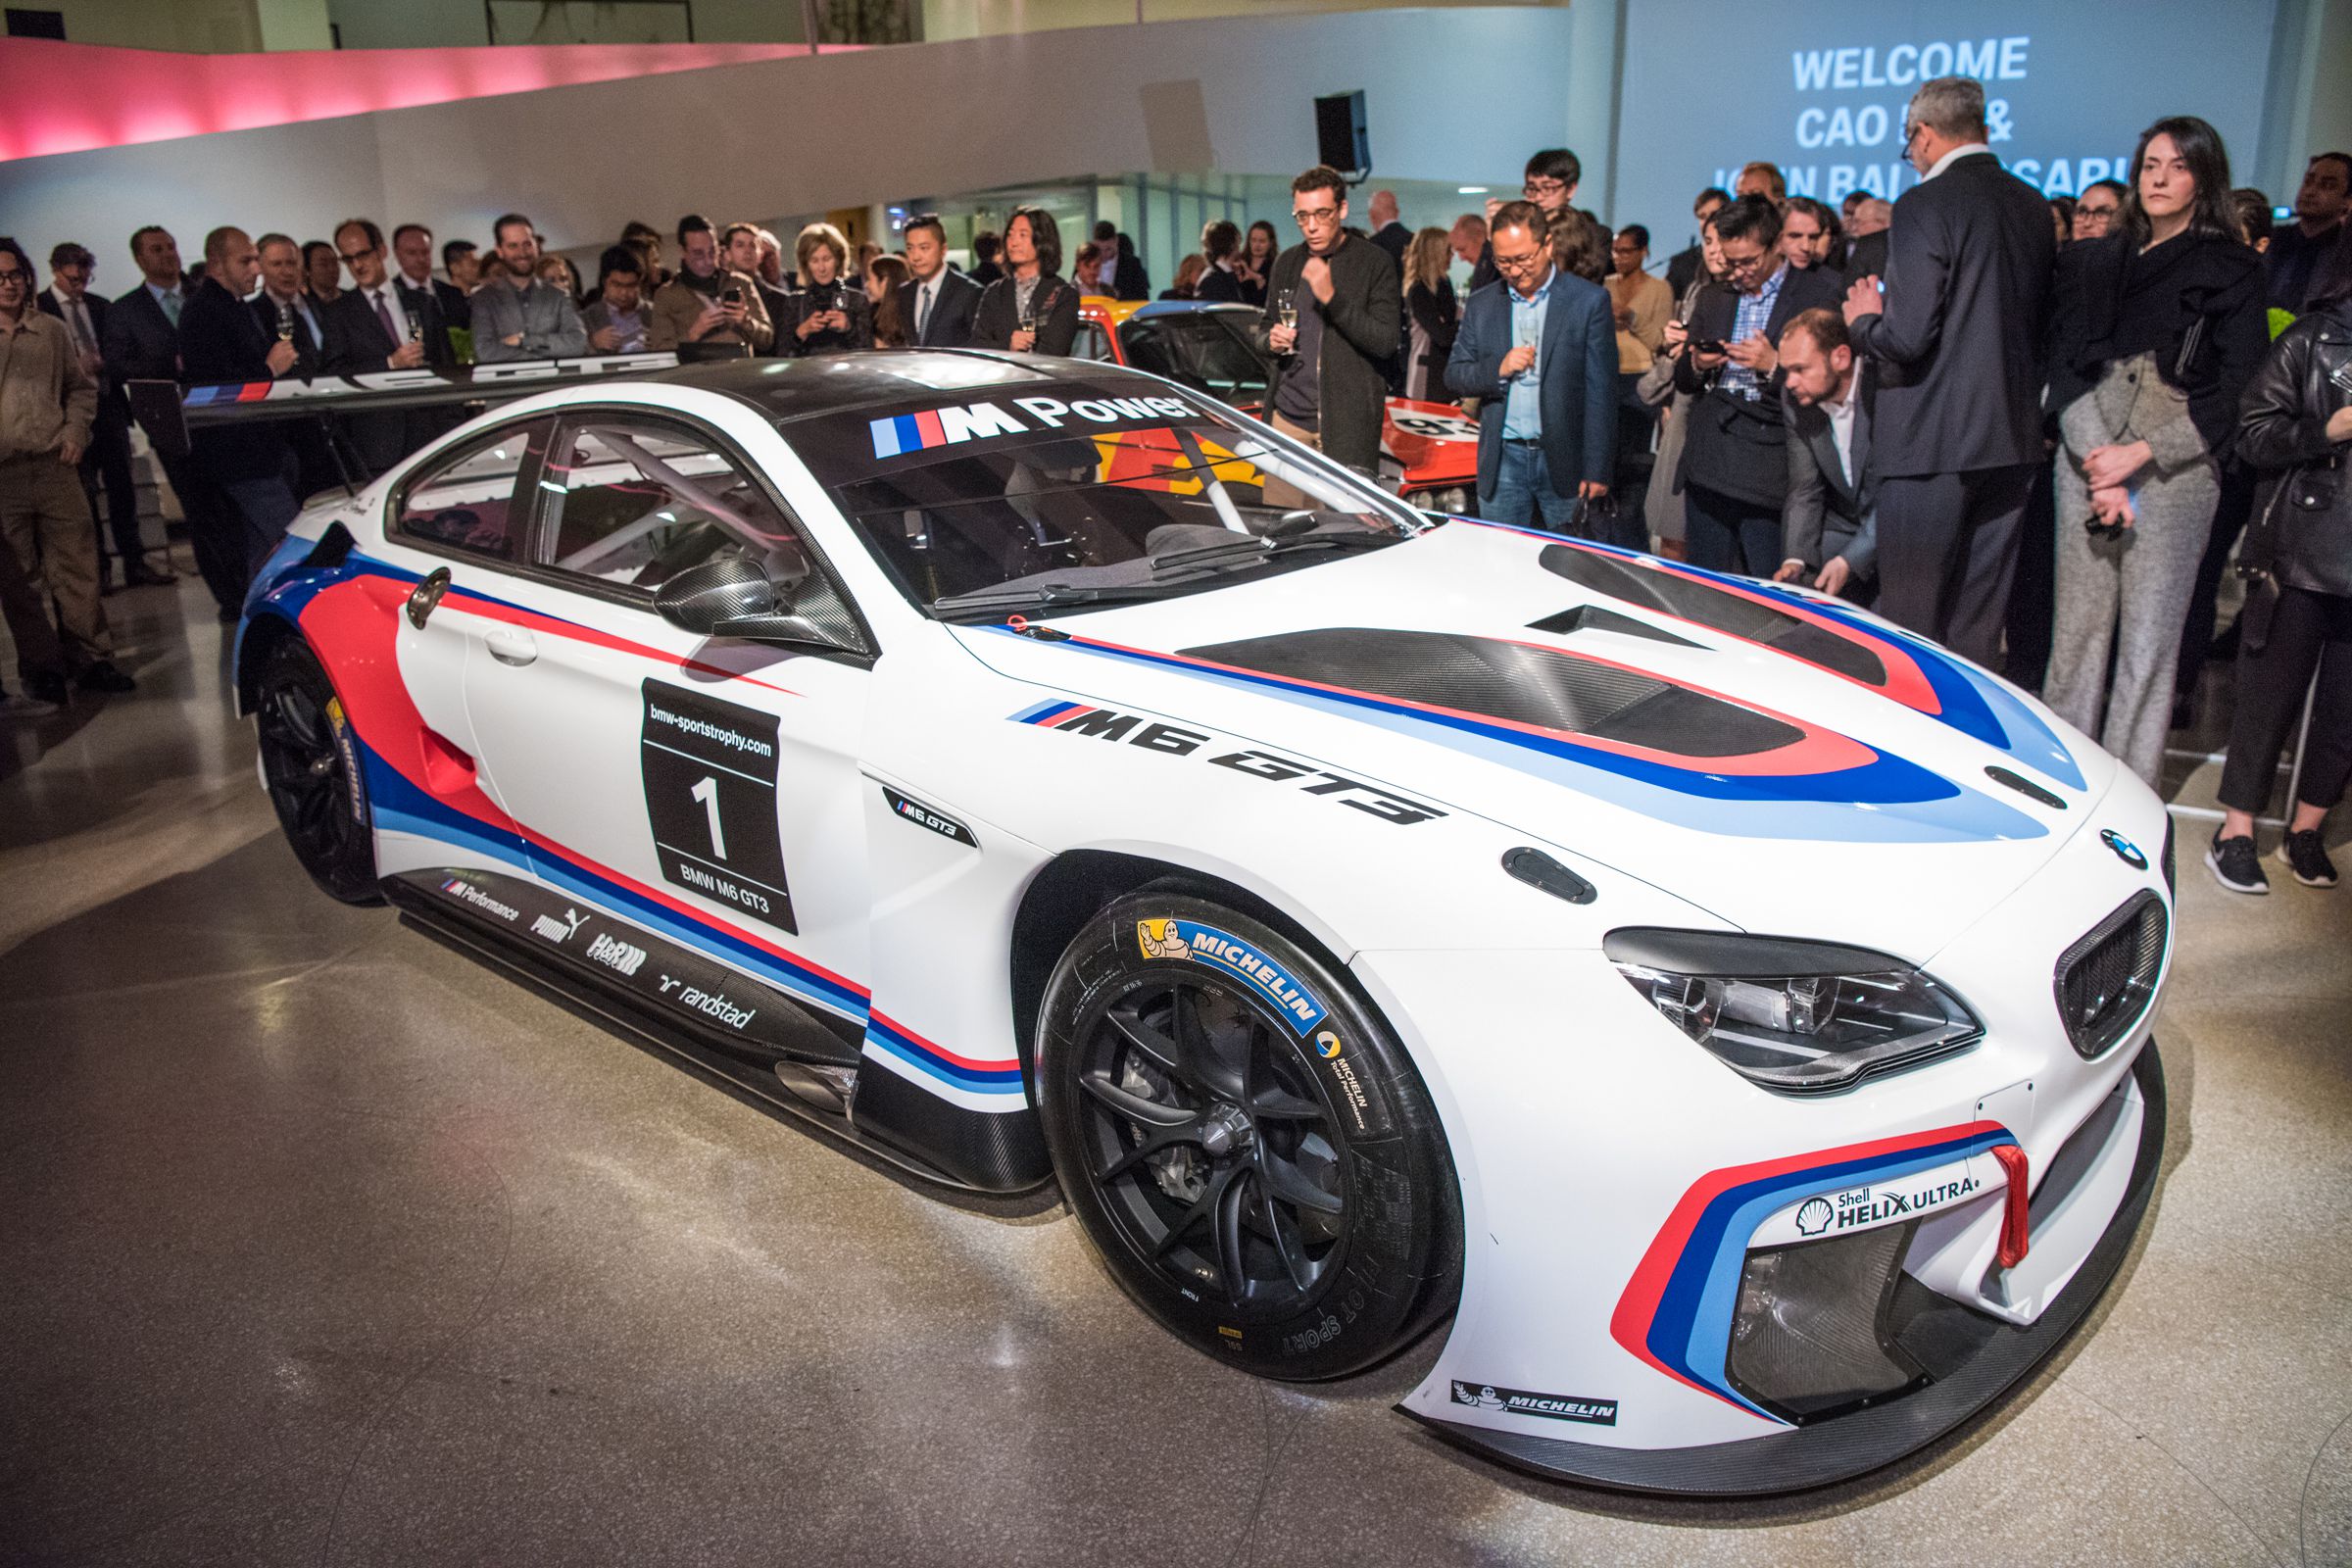 The BMW M6 GT3 is the medium for the next two art cars